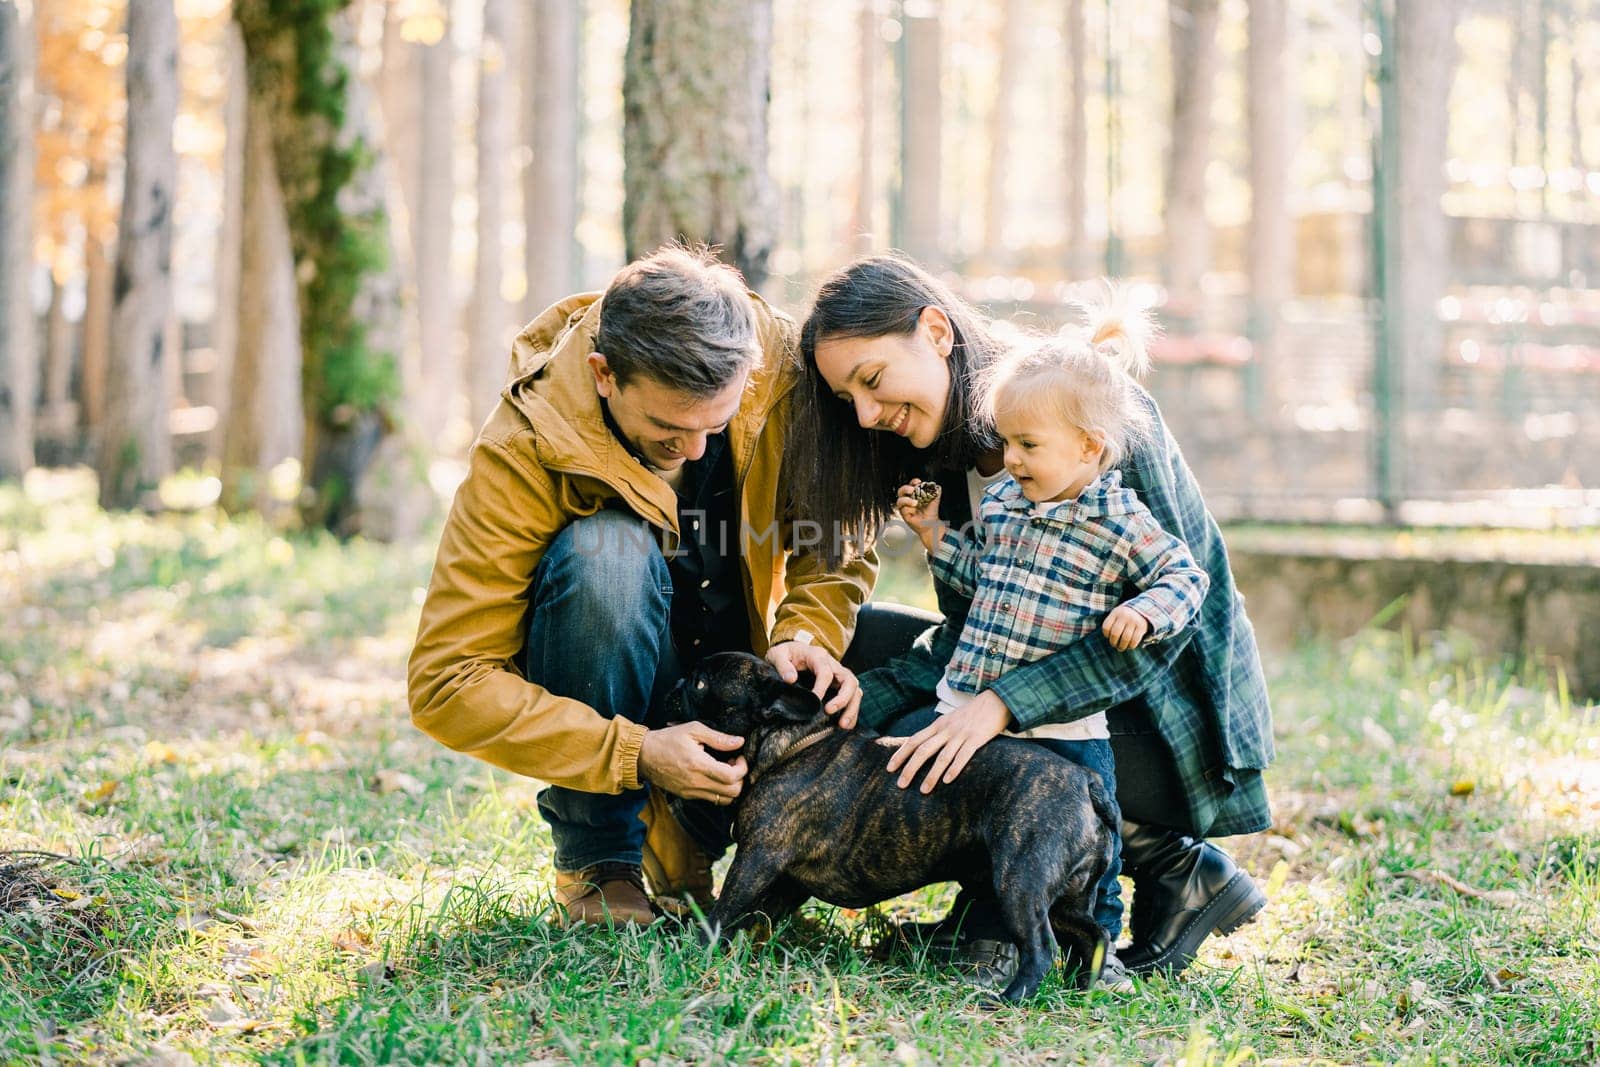 Little girl with mom and dad stroking a dog in the forest by Nadtochiy